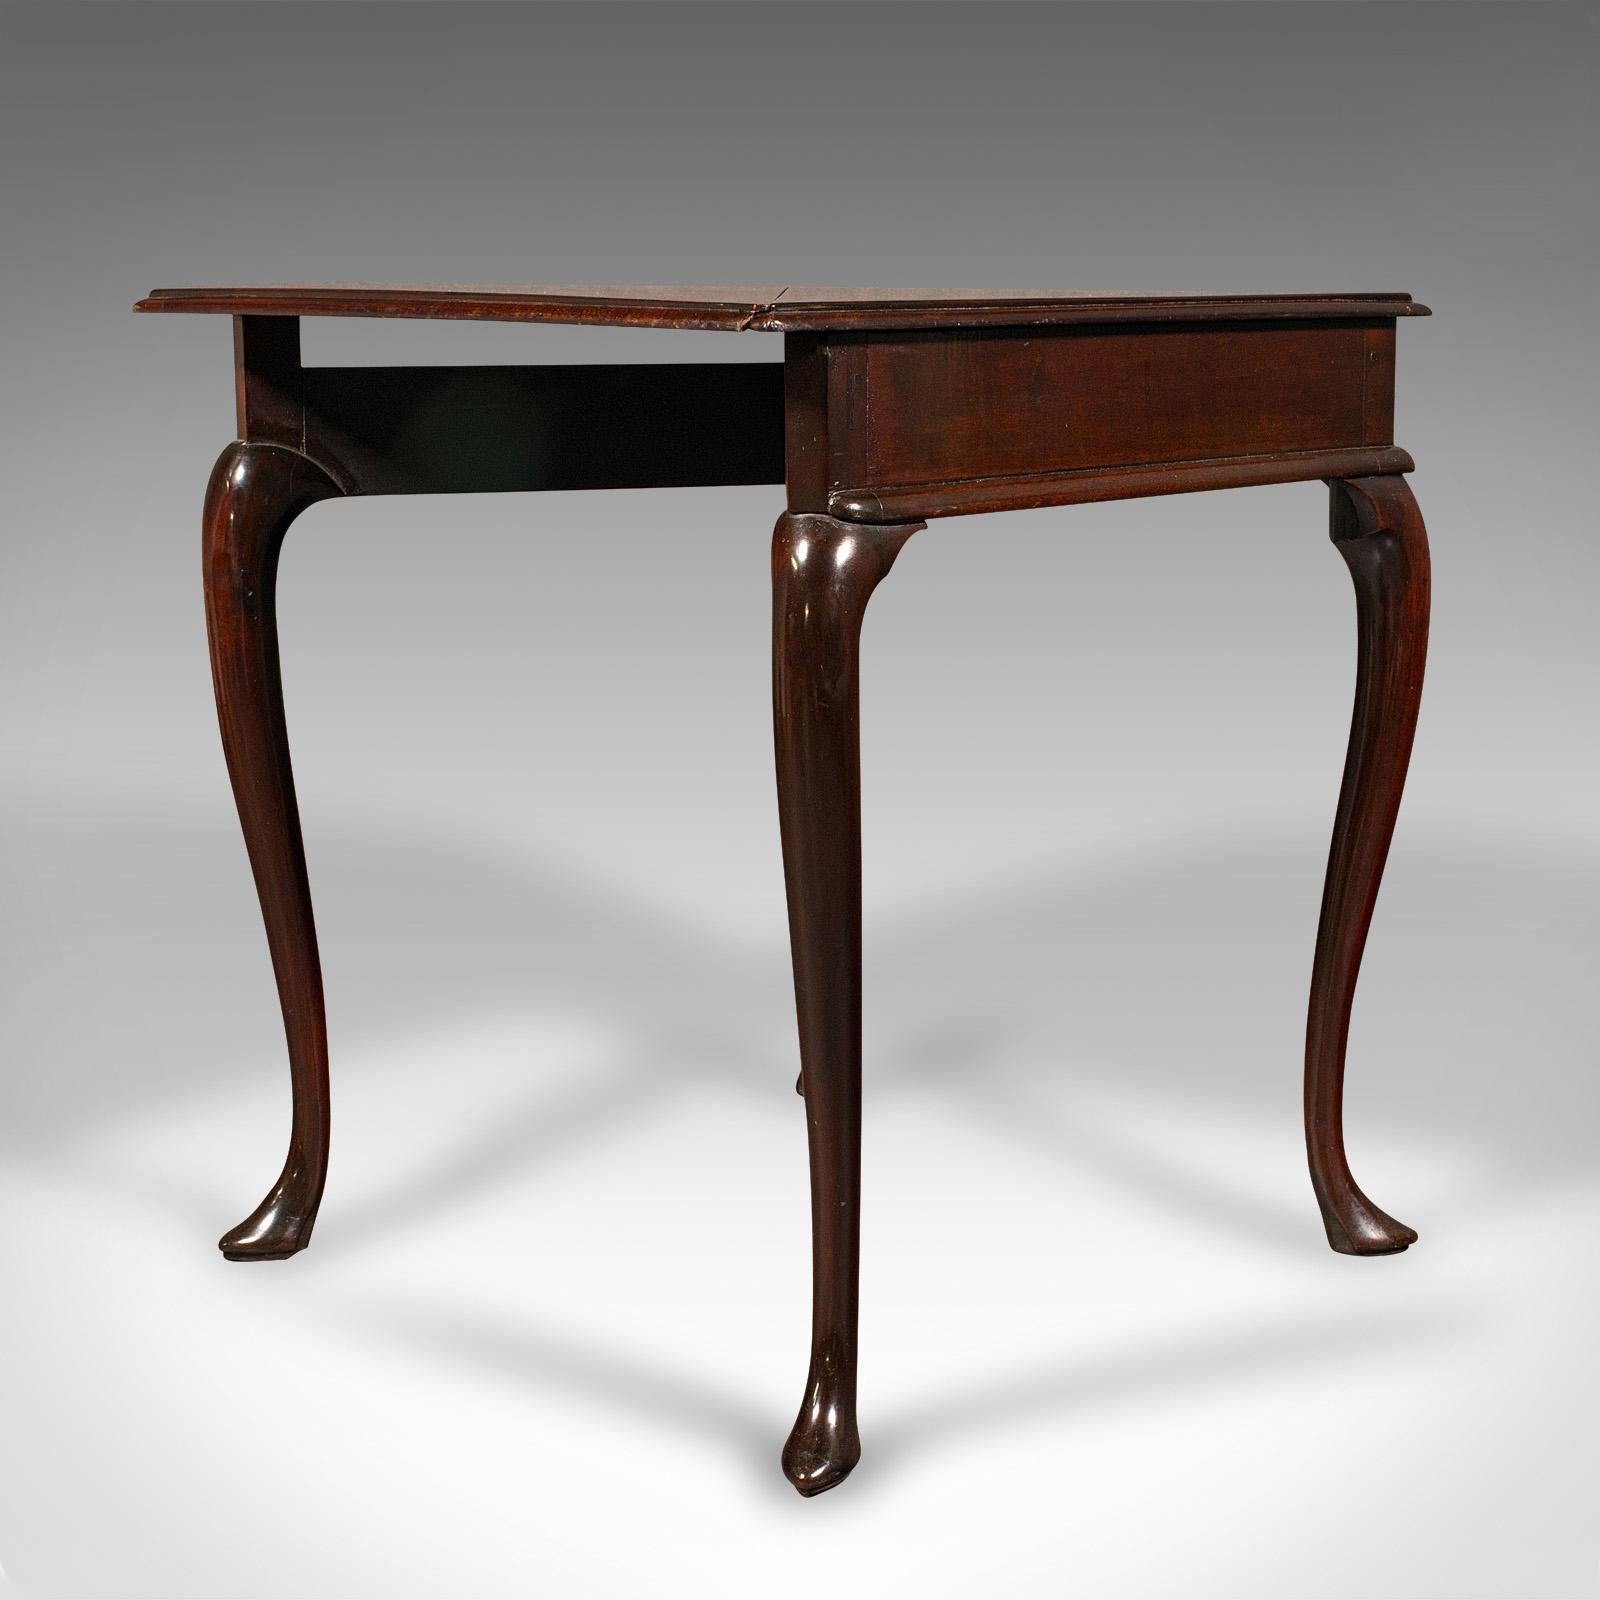 Wood Antique Supper Table, English, Folding, Occasional, Display, Georgian, C.1770 For Sale